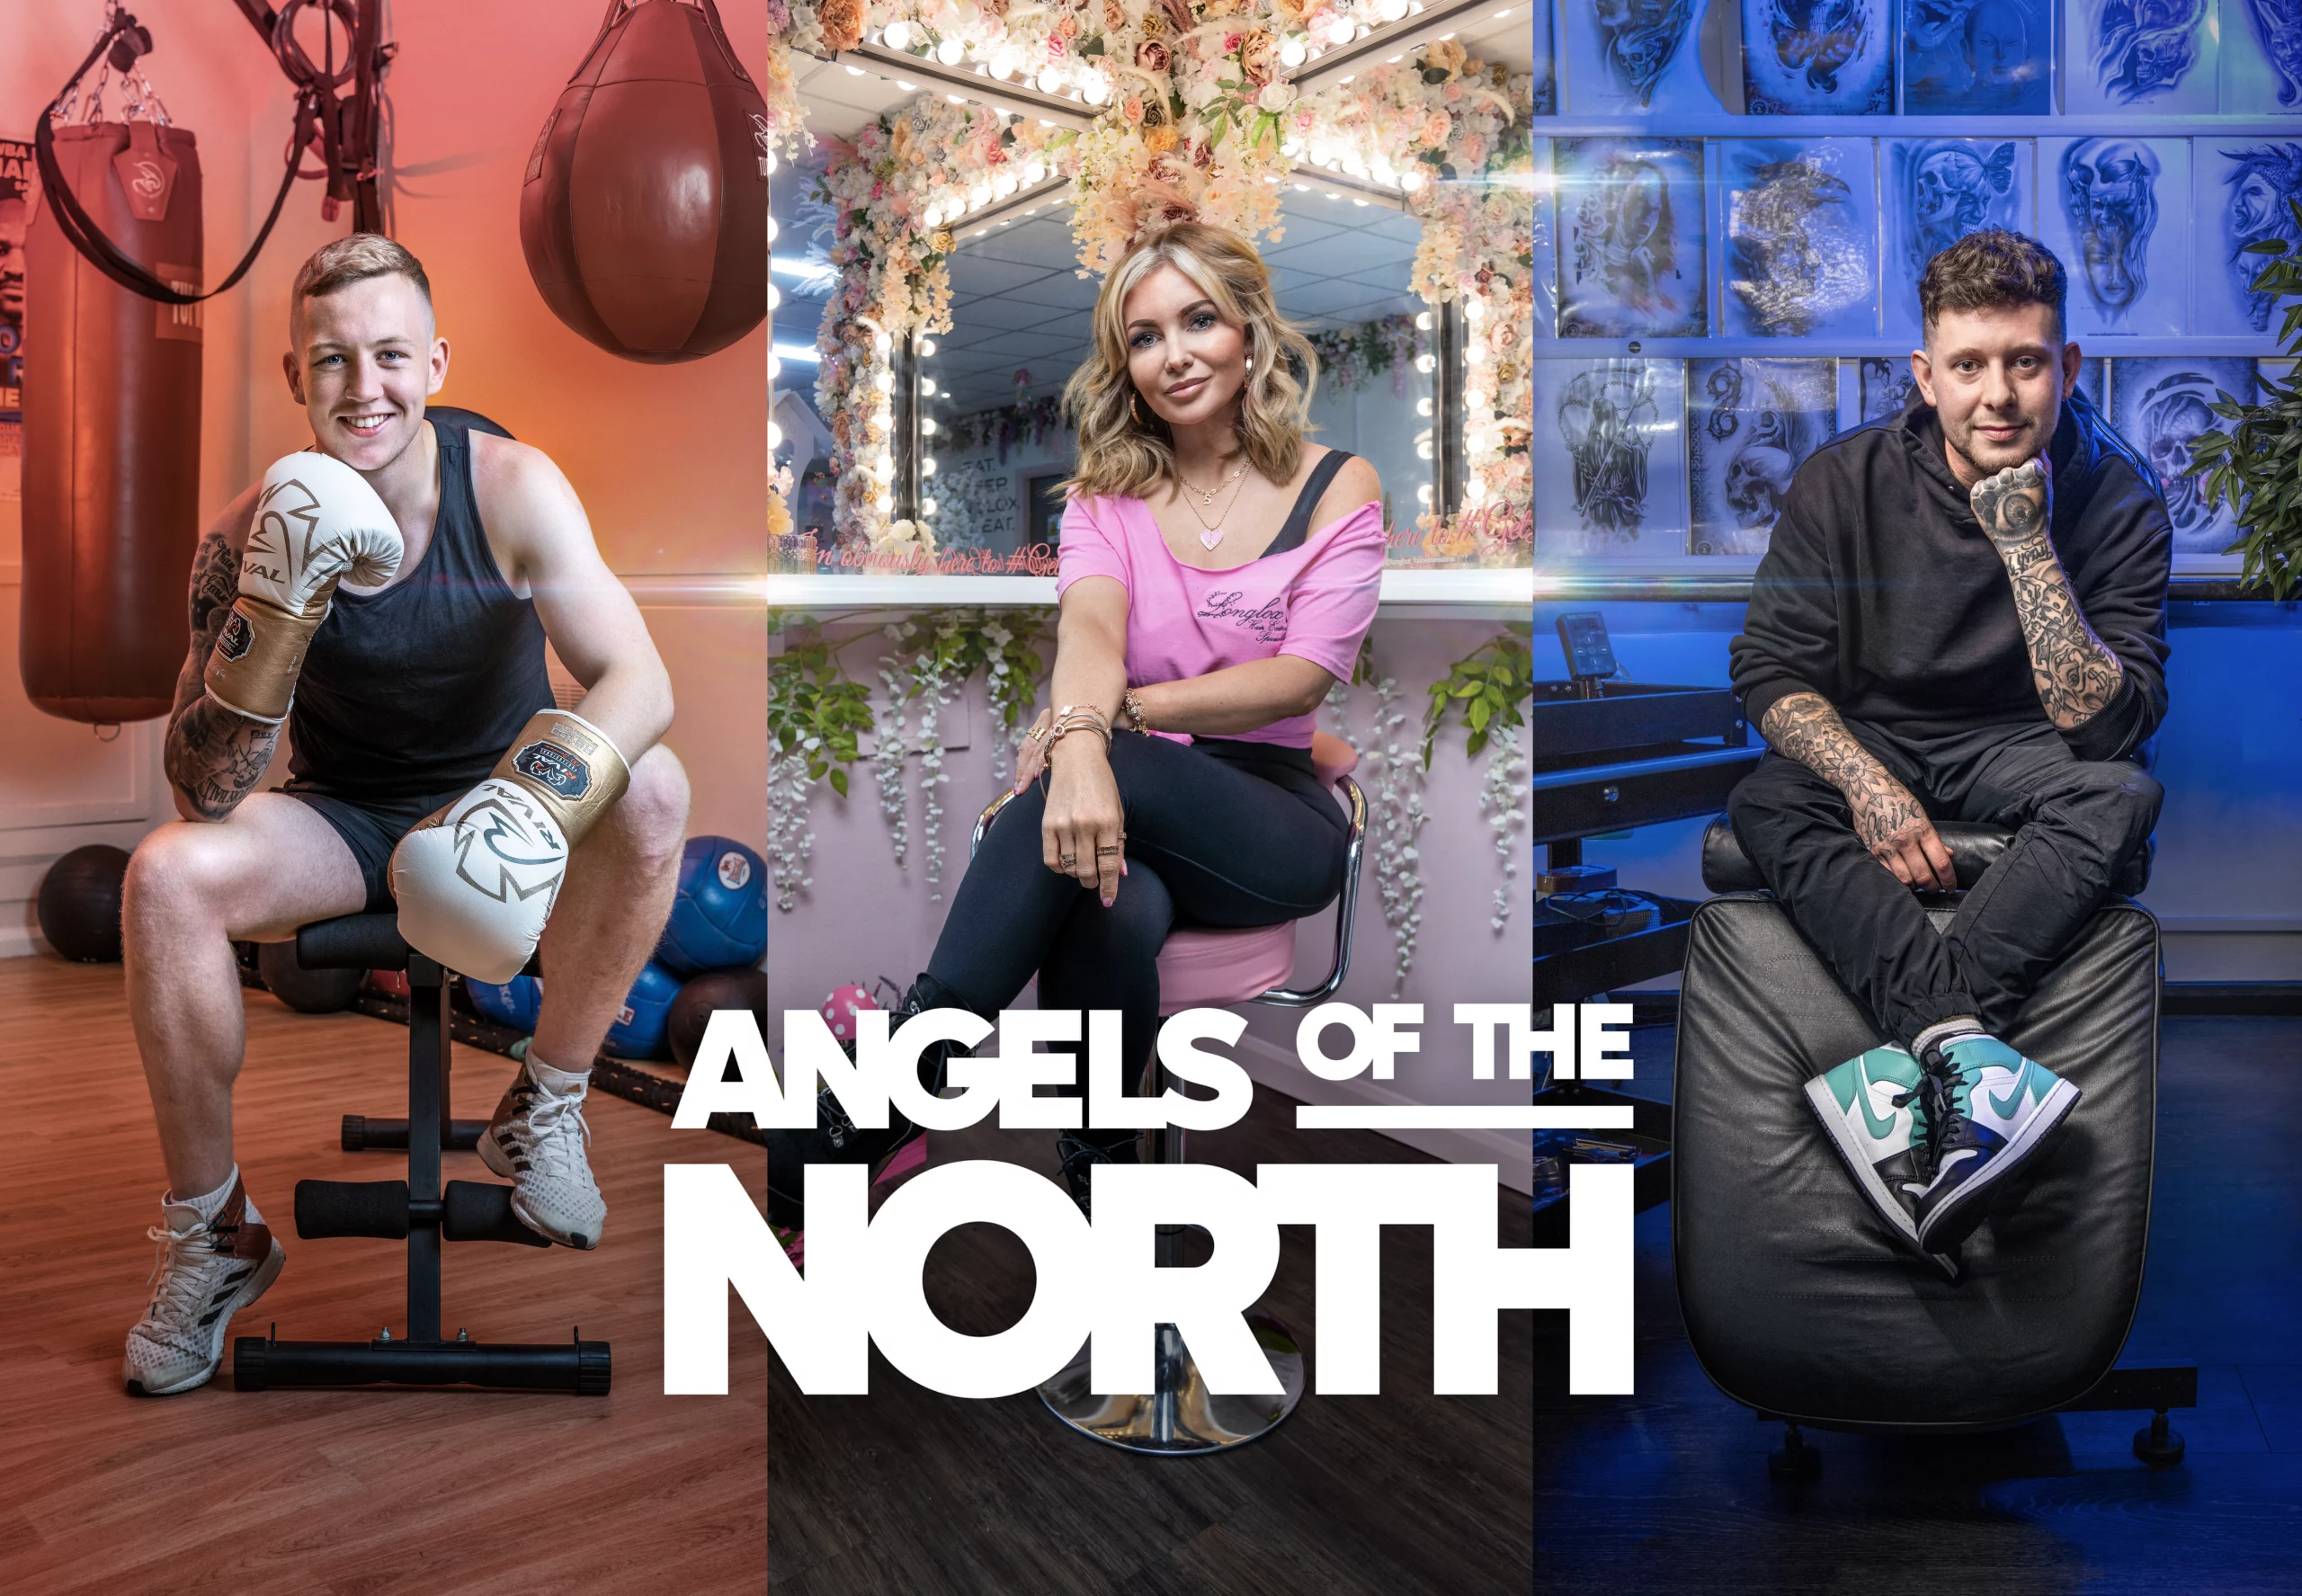 https://northeastscreen.org/wp-content/uploads/2023/02/Angels-of-the-North-S3-scaled.webp